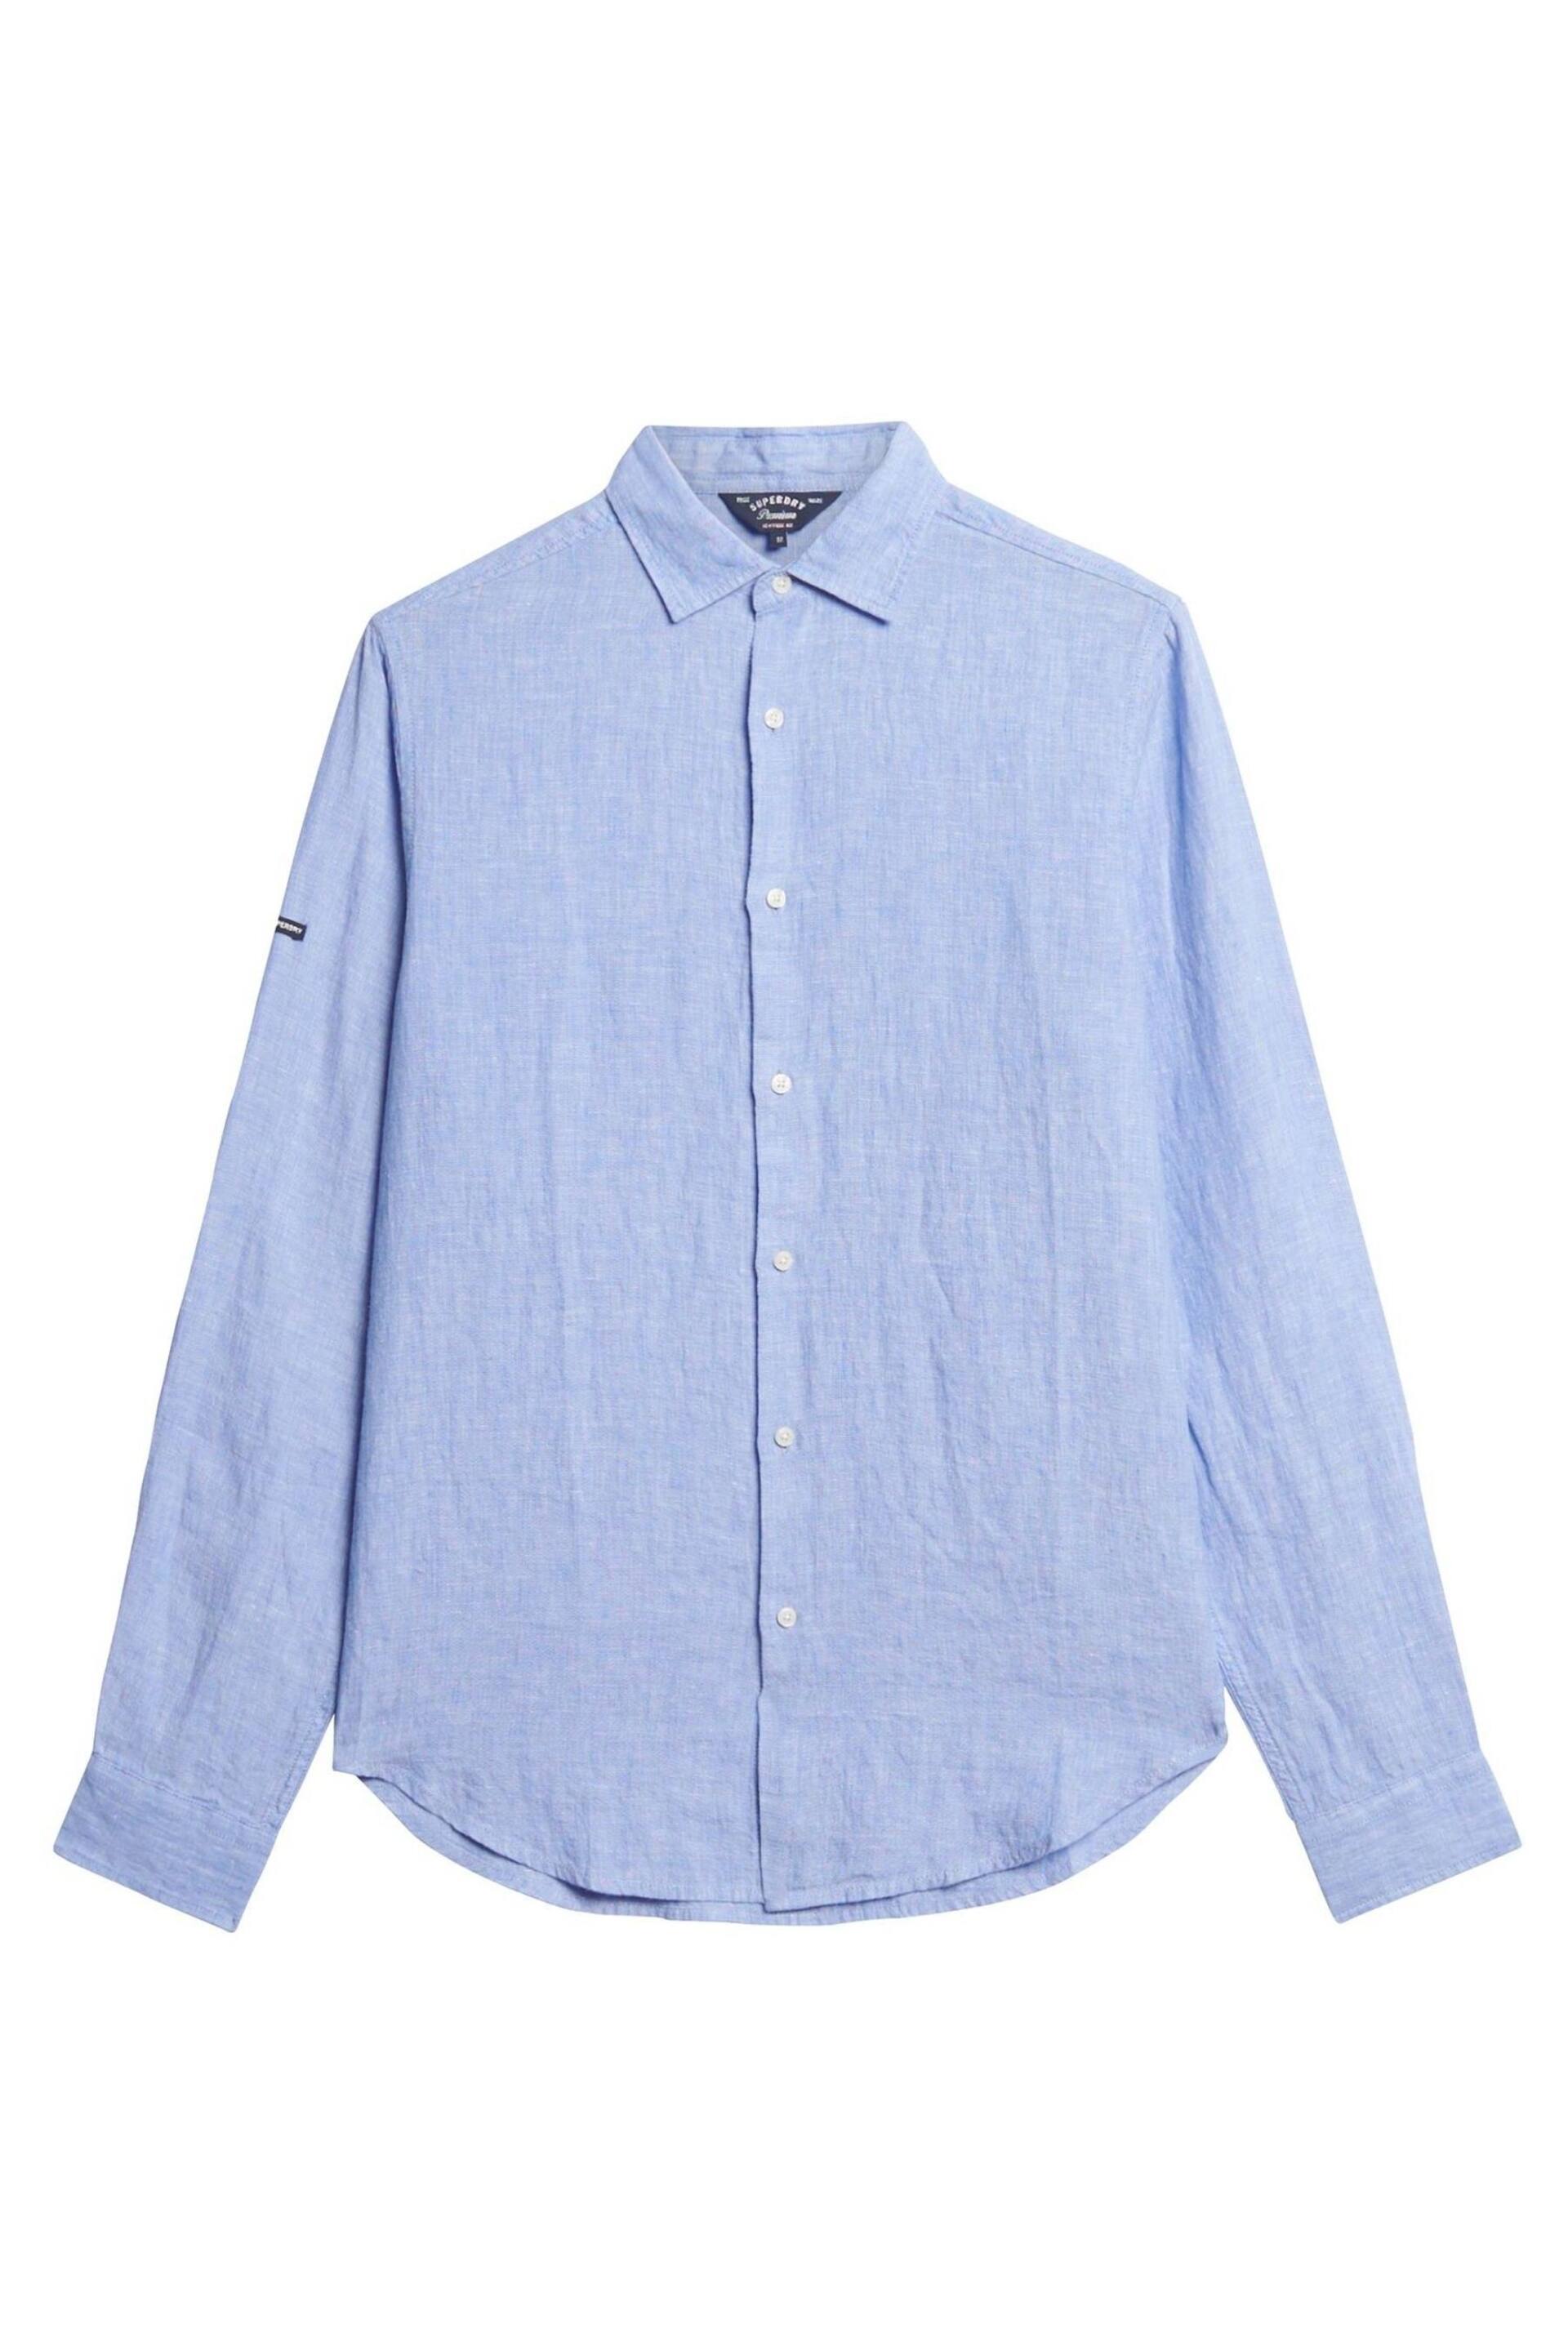 Superdry Blue Studios Casual Linen Long Sleeved Shirt - Image 4 of 6